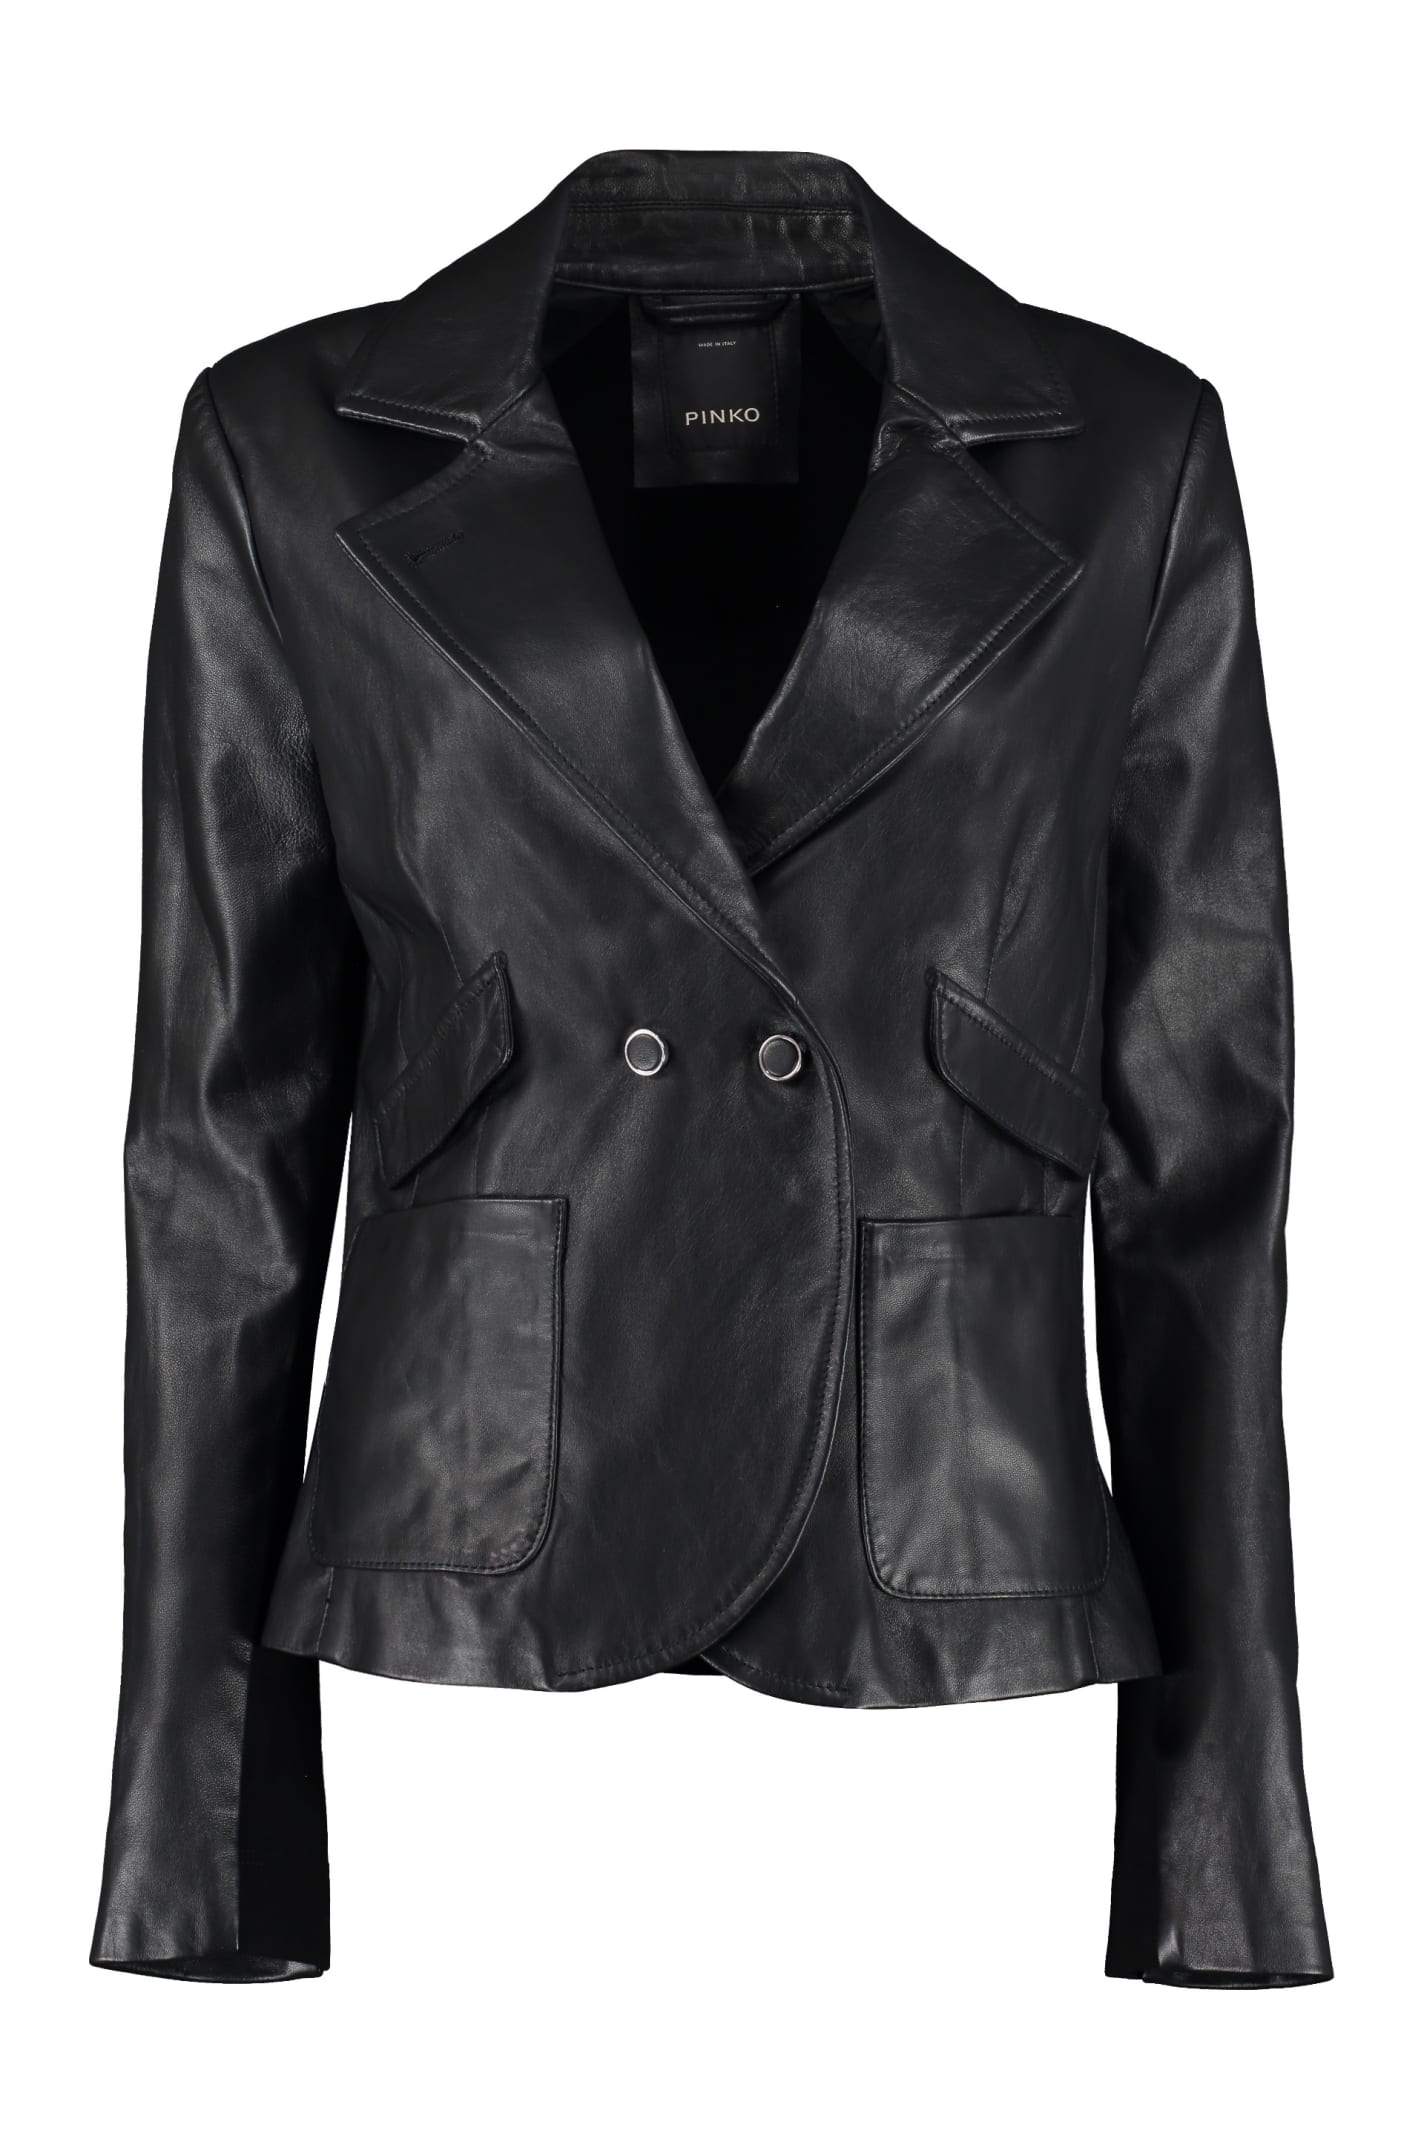 Pinko Colonial Leather Jacket